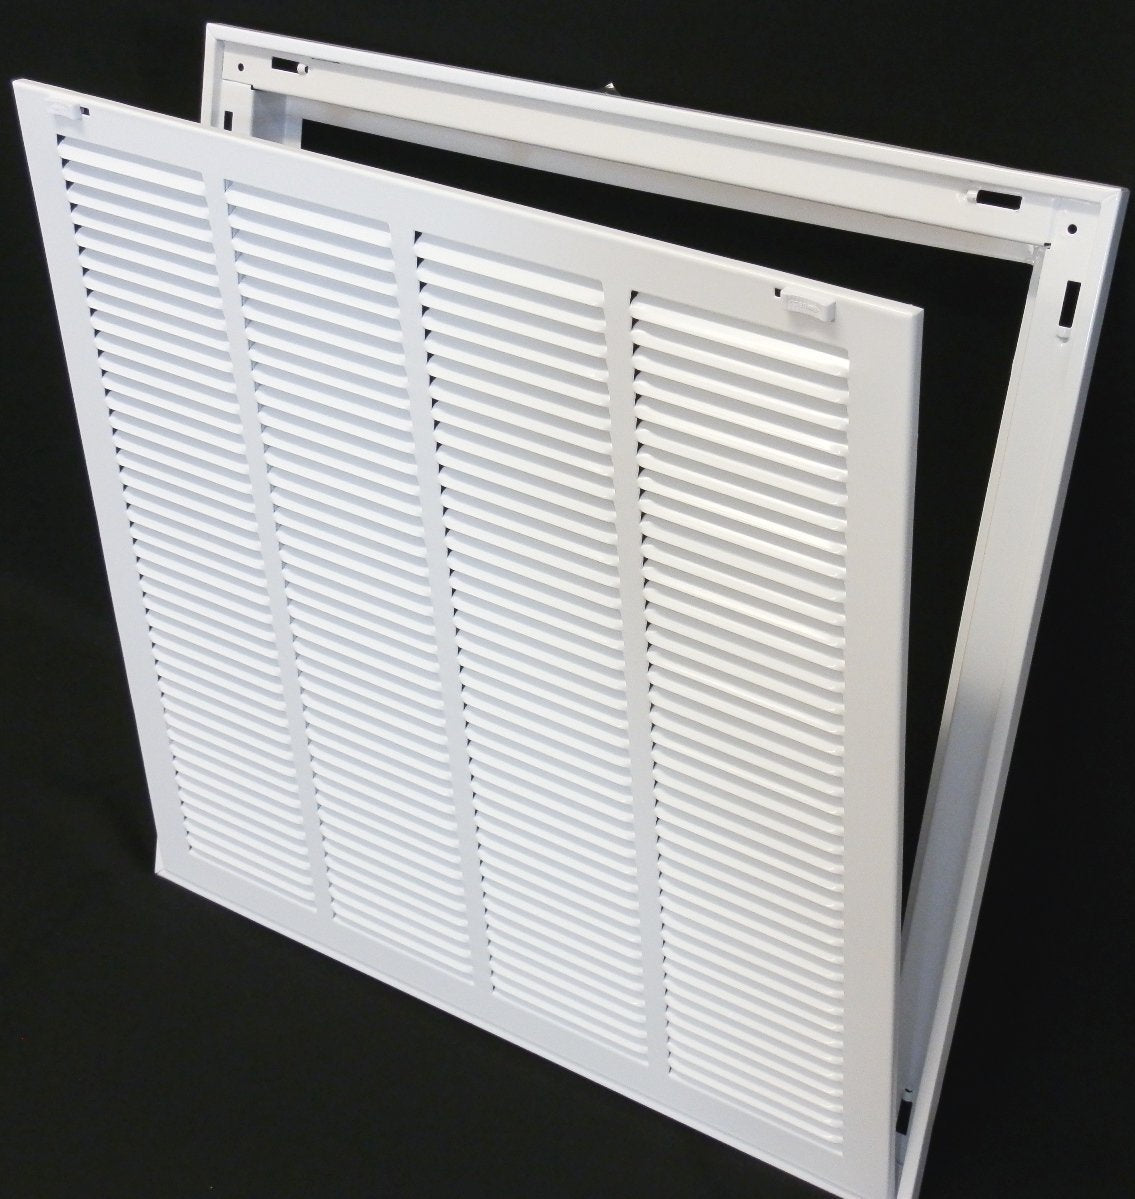 10&quot; X 32&quot; Steel Return Air Filter Grille for 1&quot; Filter - Removable Frame - [Outer Dimensions: 12 5/8&quot; X 34 5/8&quot;]